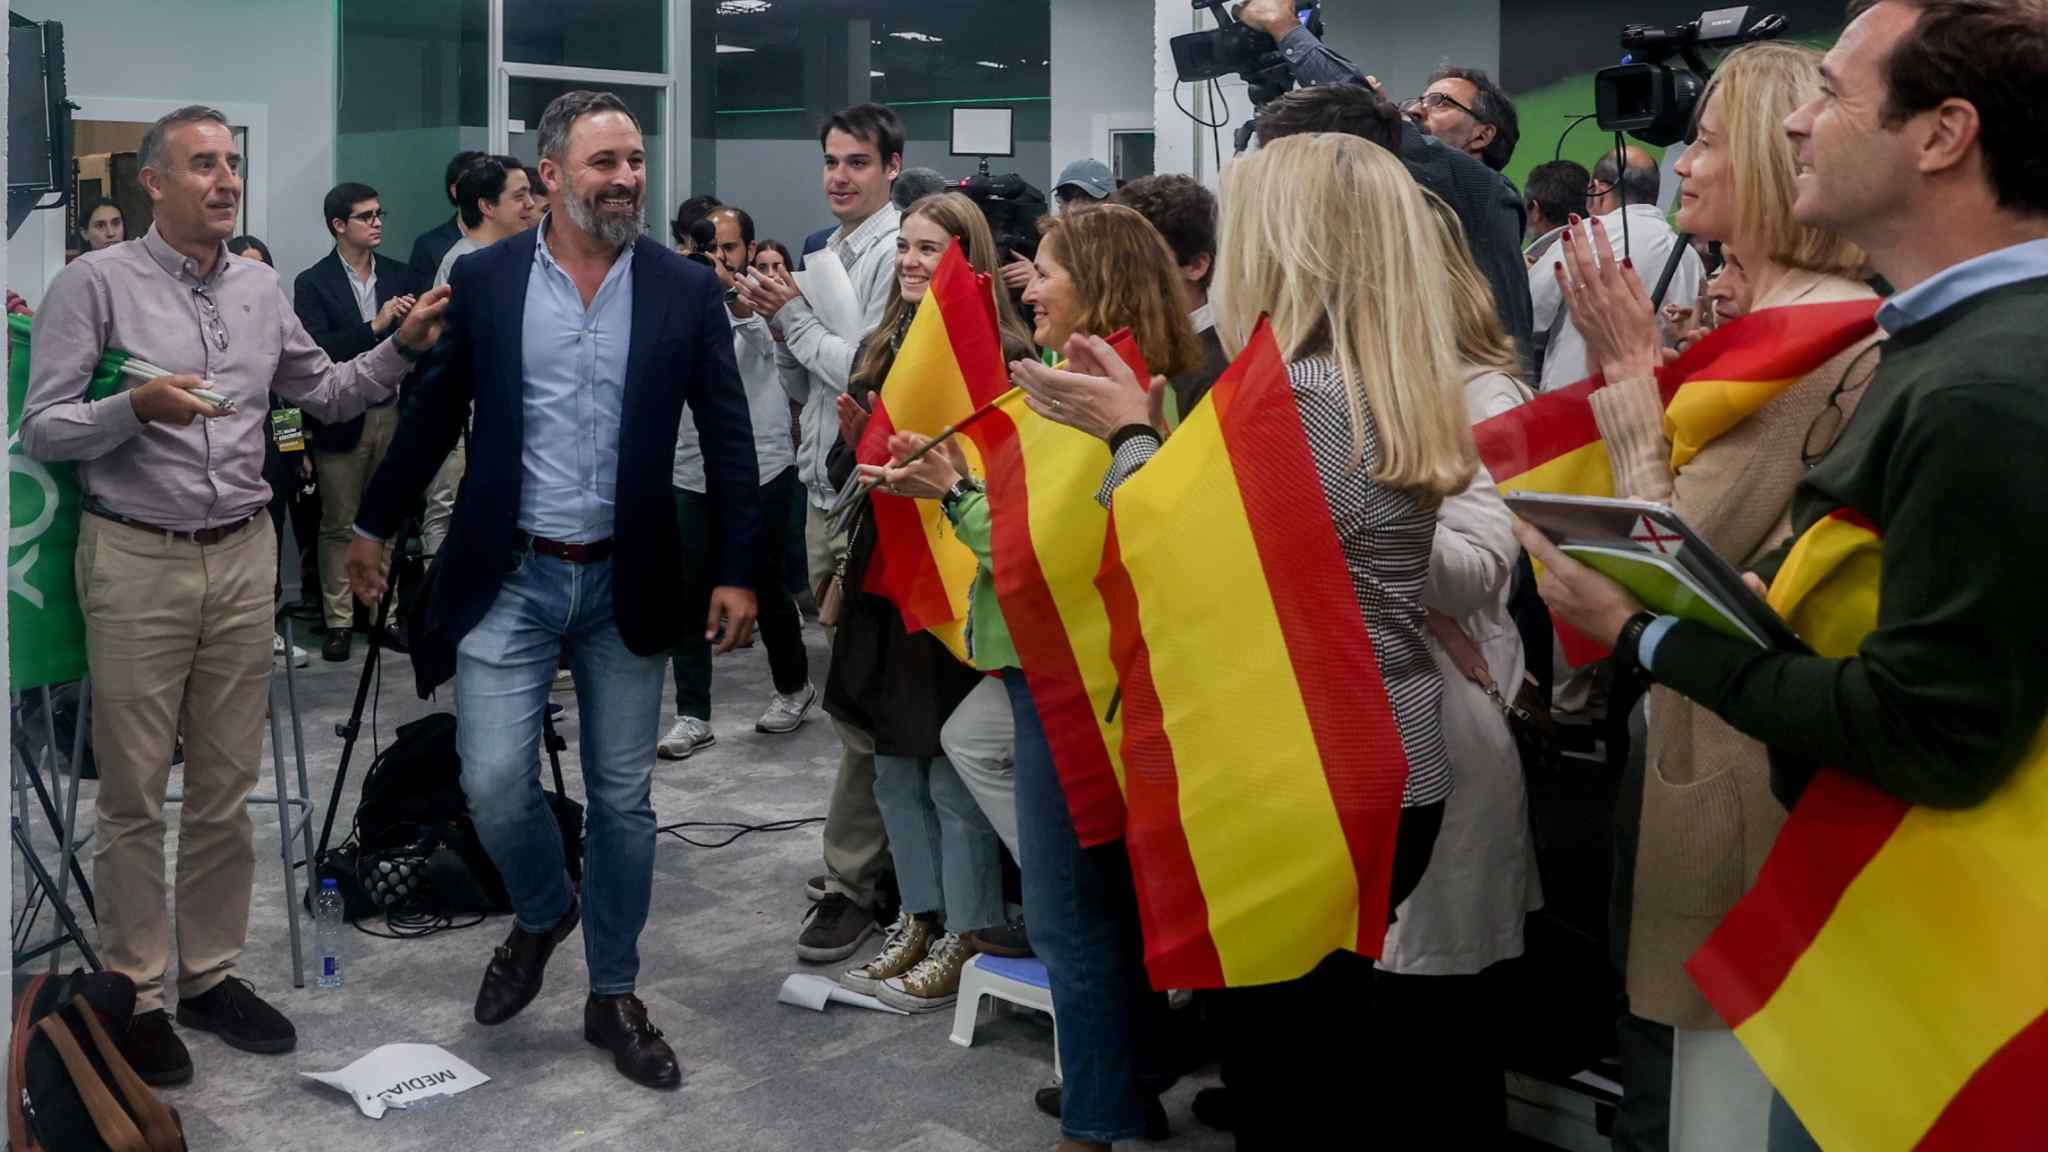 Vox’s role as kingmaker takes centre stage in Spain